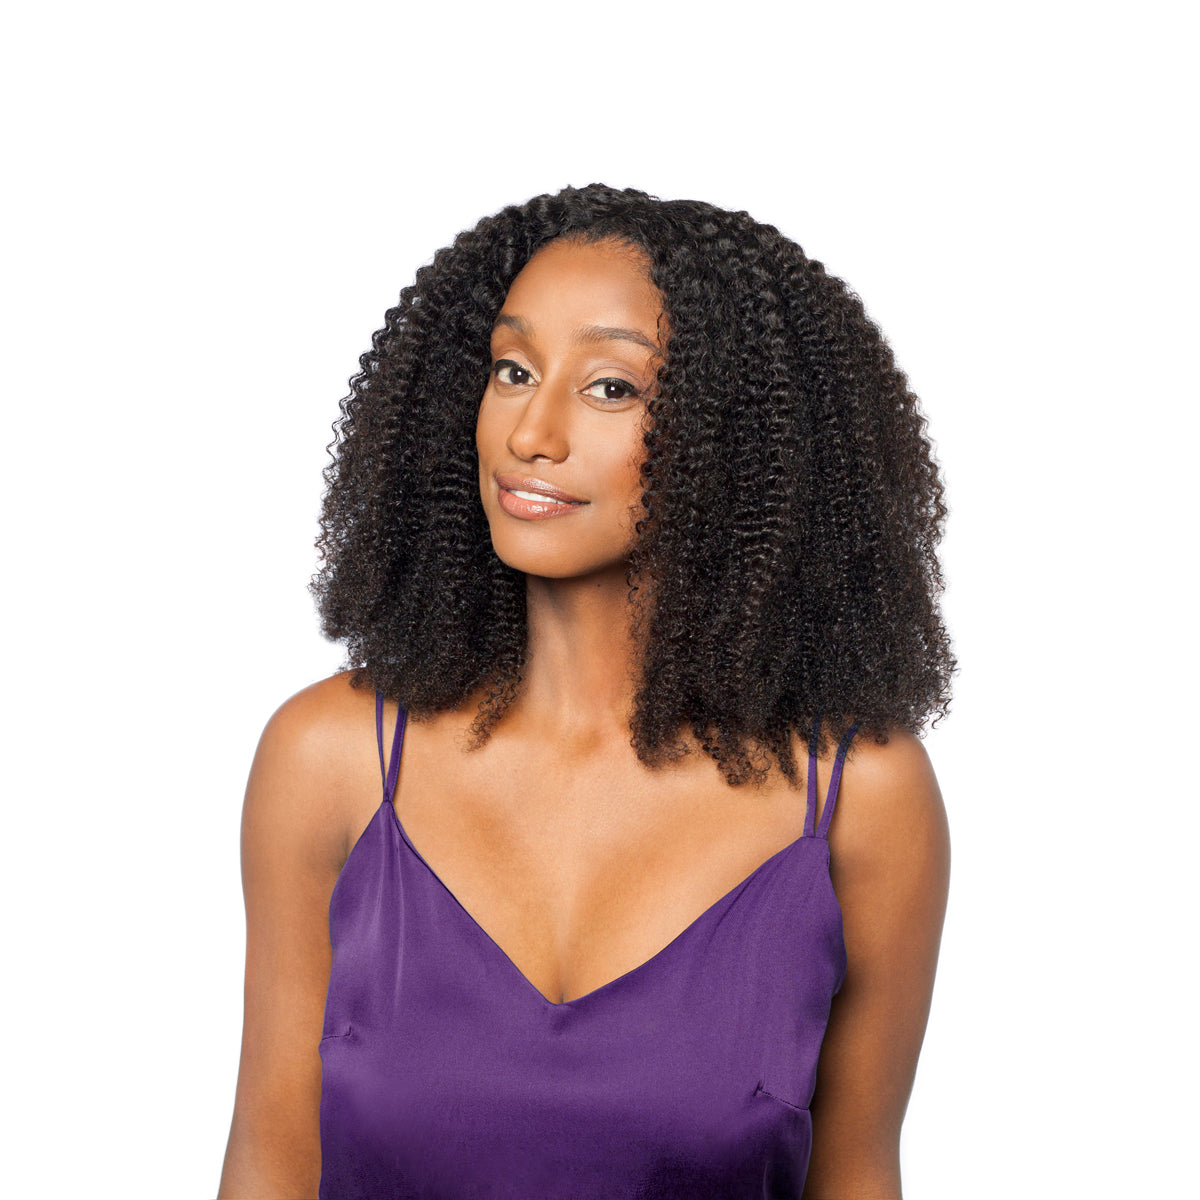 NEW!! Try our afro curly frontal to complete your natural look